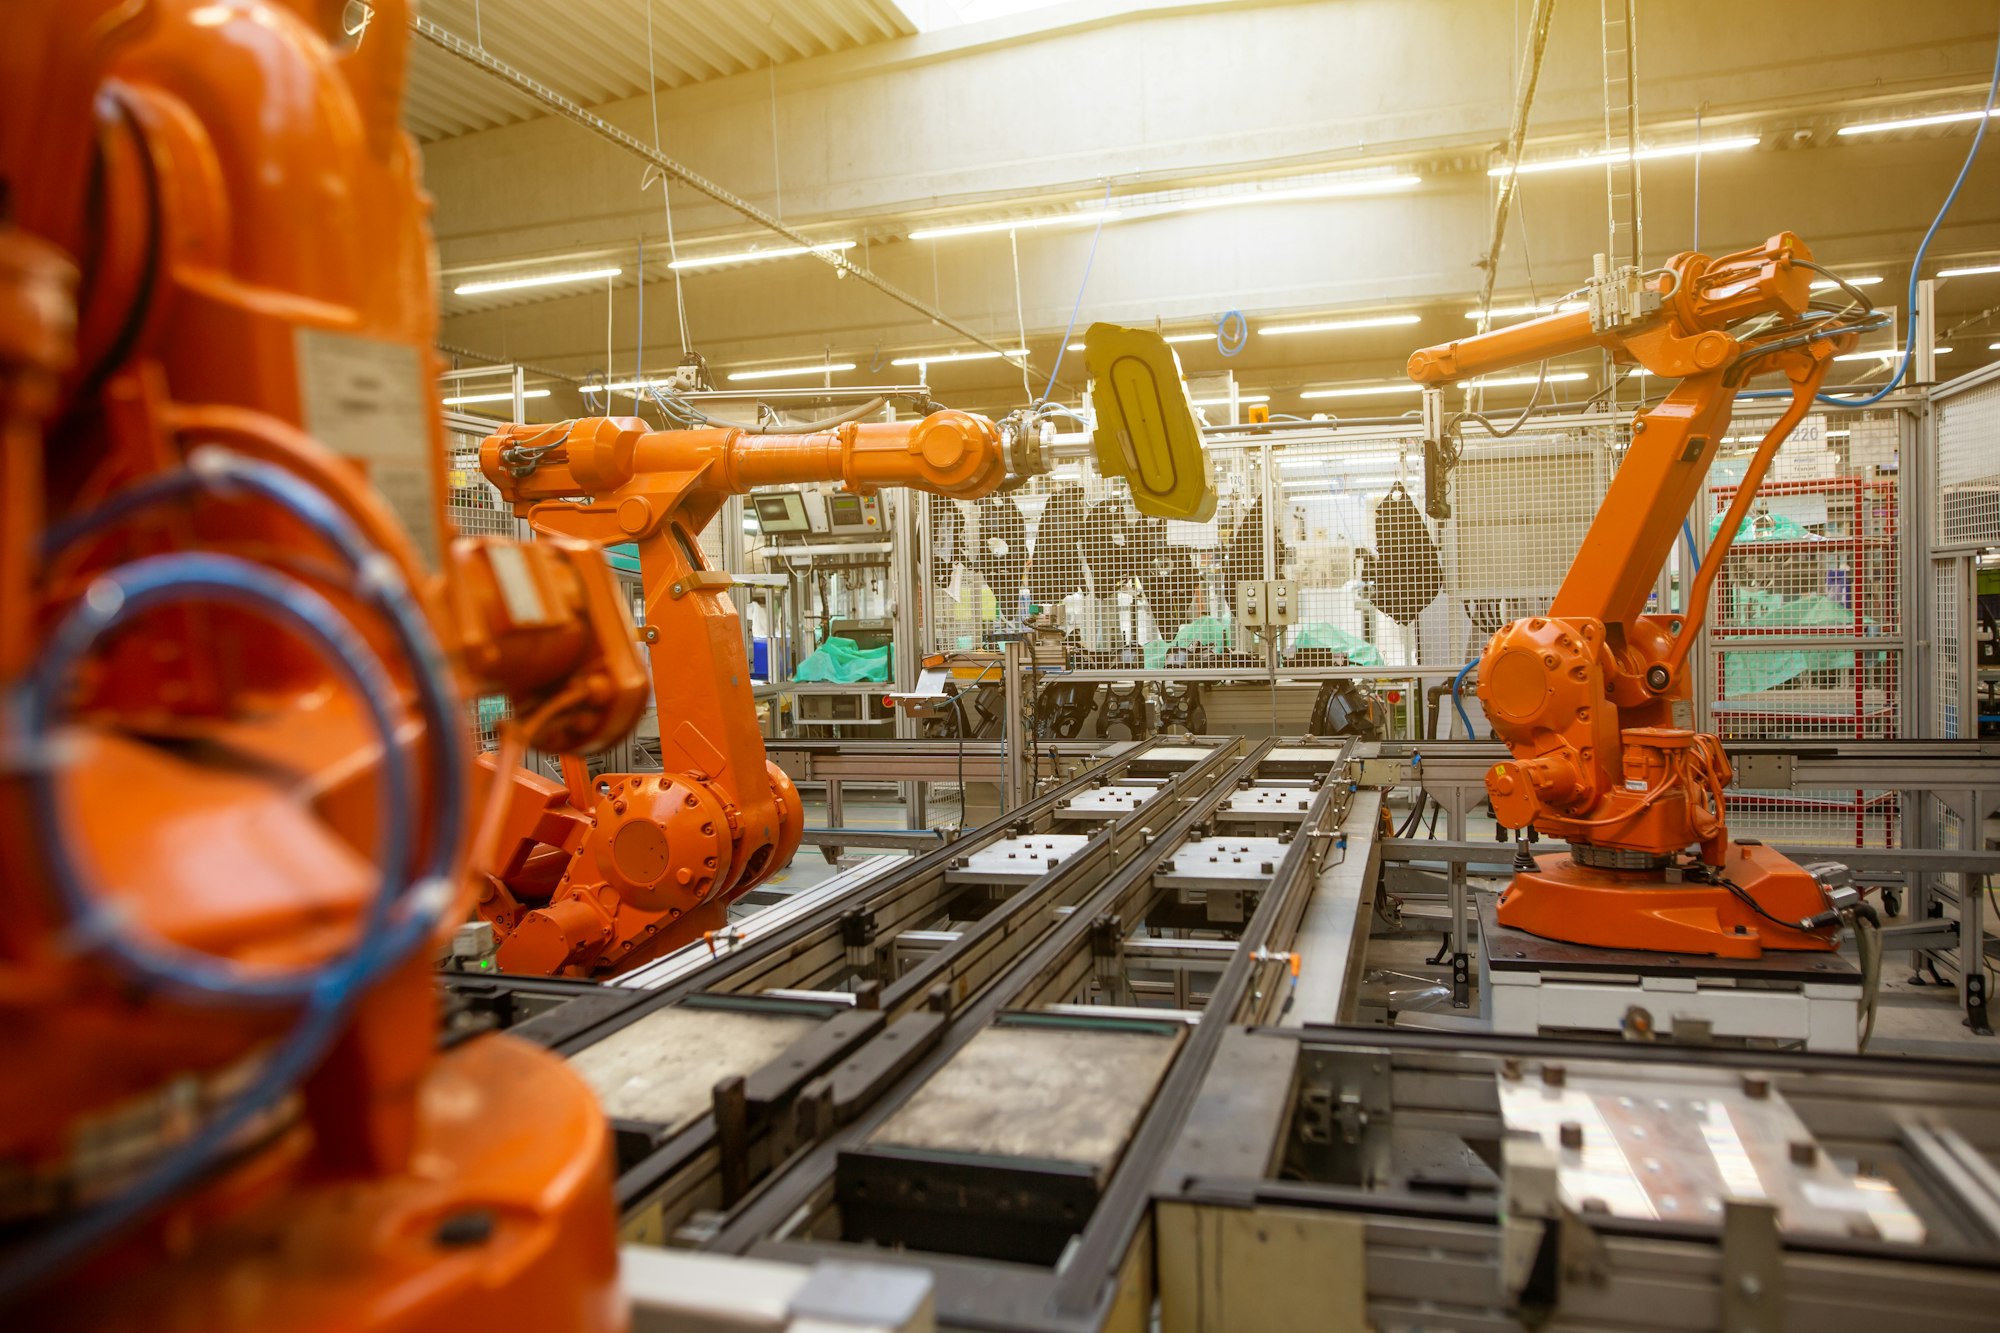 Automatic robots in industrial factory assembling car parts